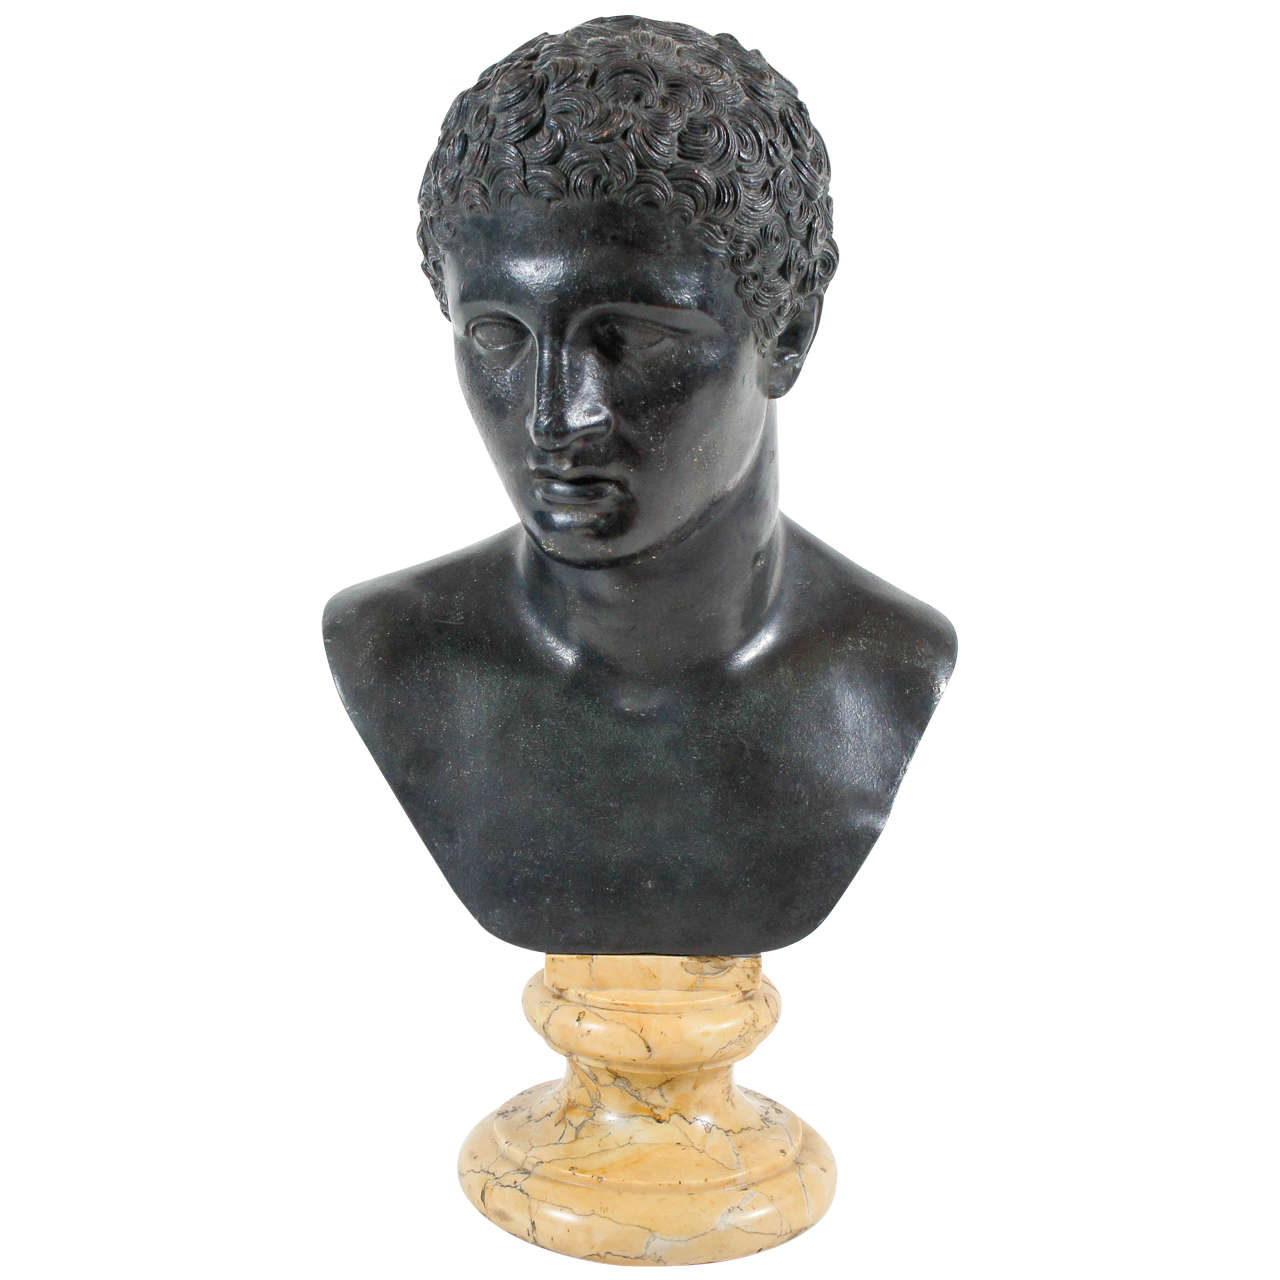 Bronze Bust of Hermes Attributed to the Chiurazzi Foundry, Naples, c. 1880